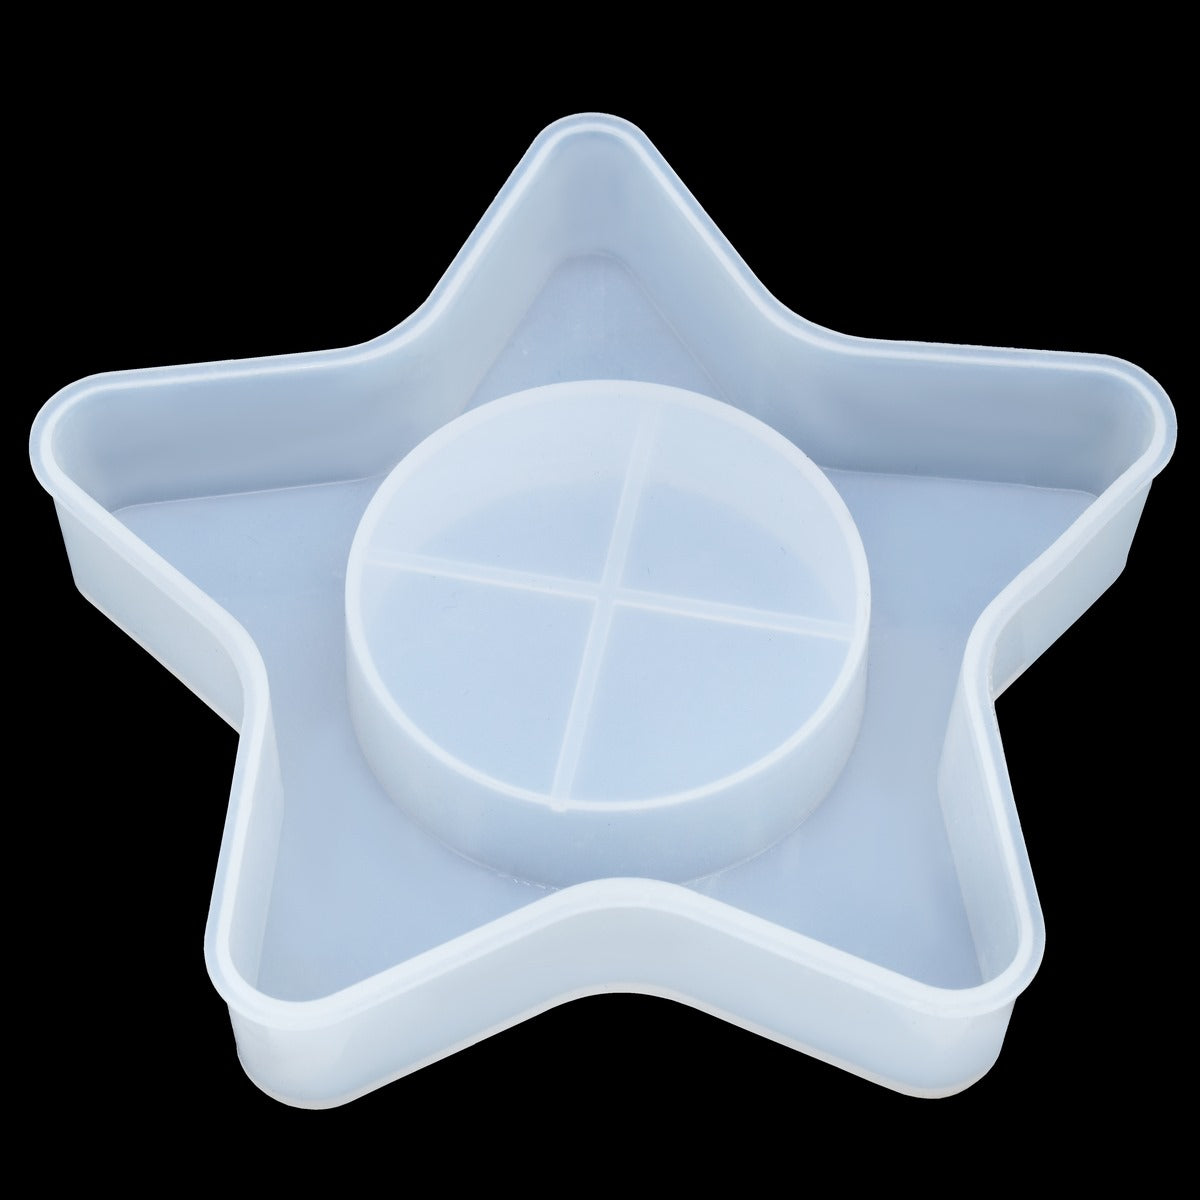 jags-mumbai Mould Starr Silicone Mold Candle Holder